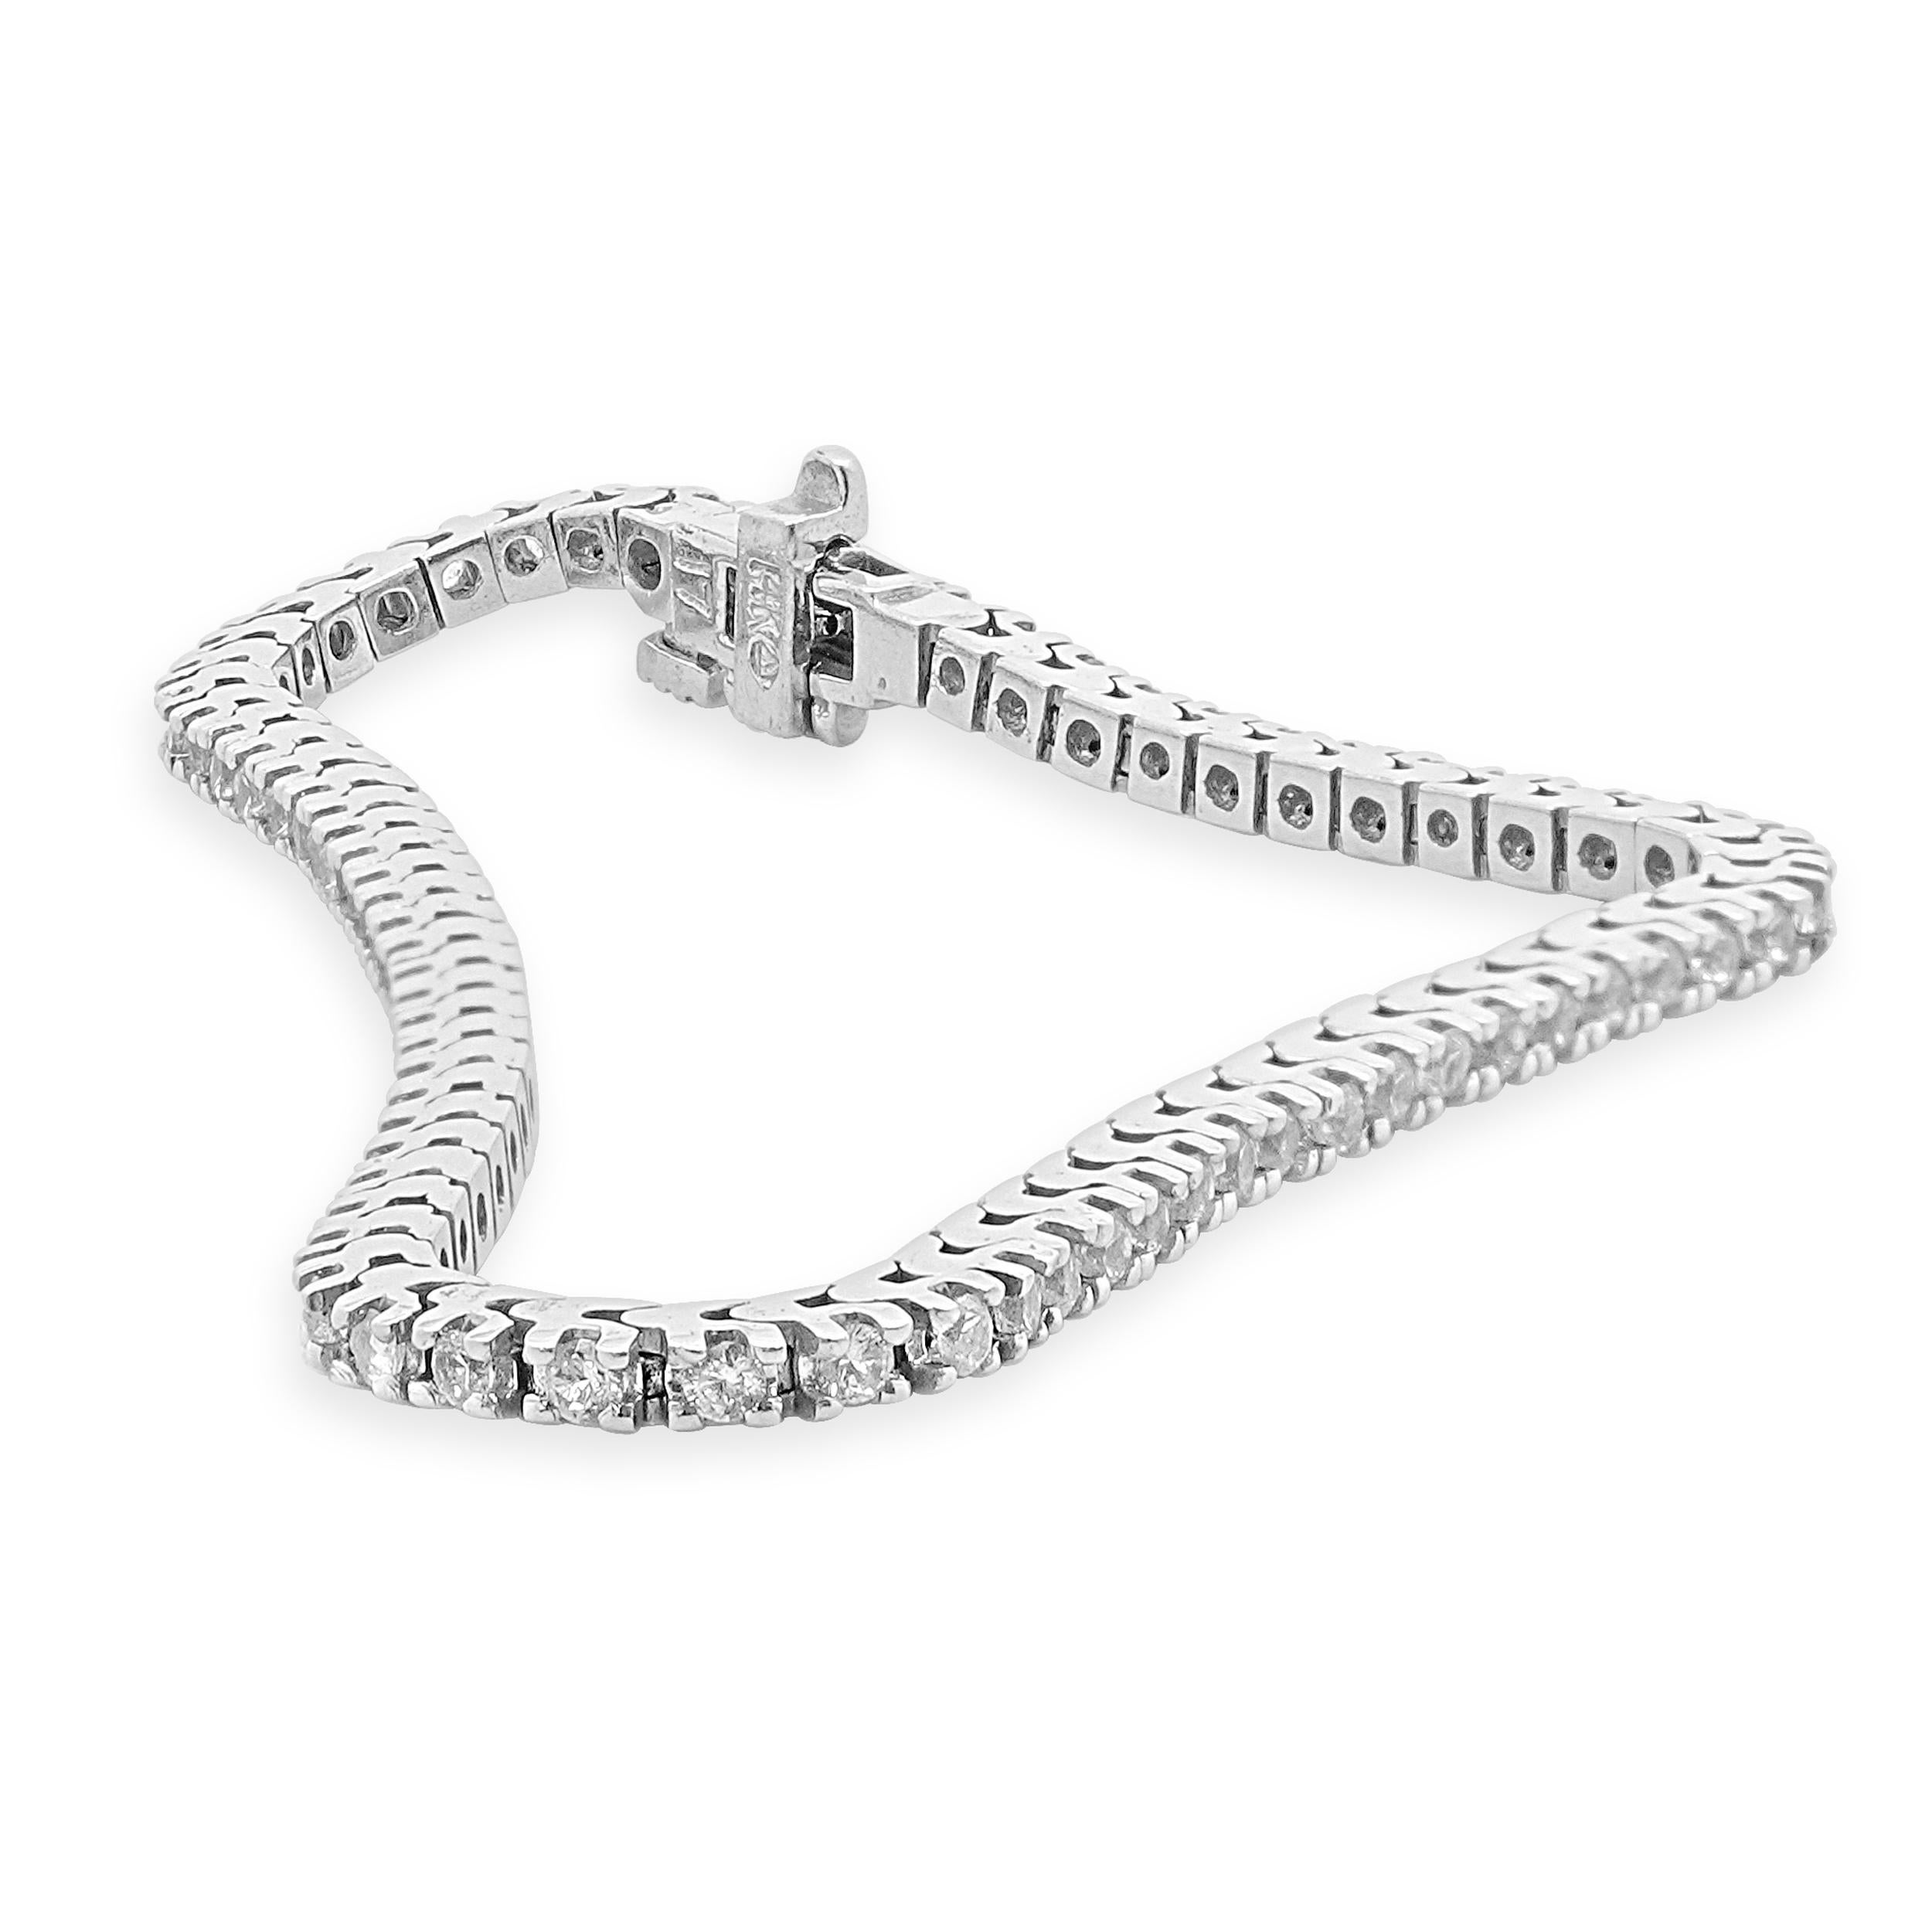 Designer: custom
Material: 14K white gold
Sapphire: 77 round cut = 1.89cttw
Weight: 8.96 grams
Dimensions: bracelet will fit up to a 6.5-inch wrist